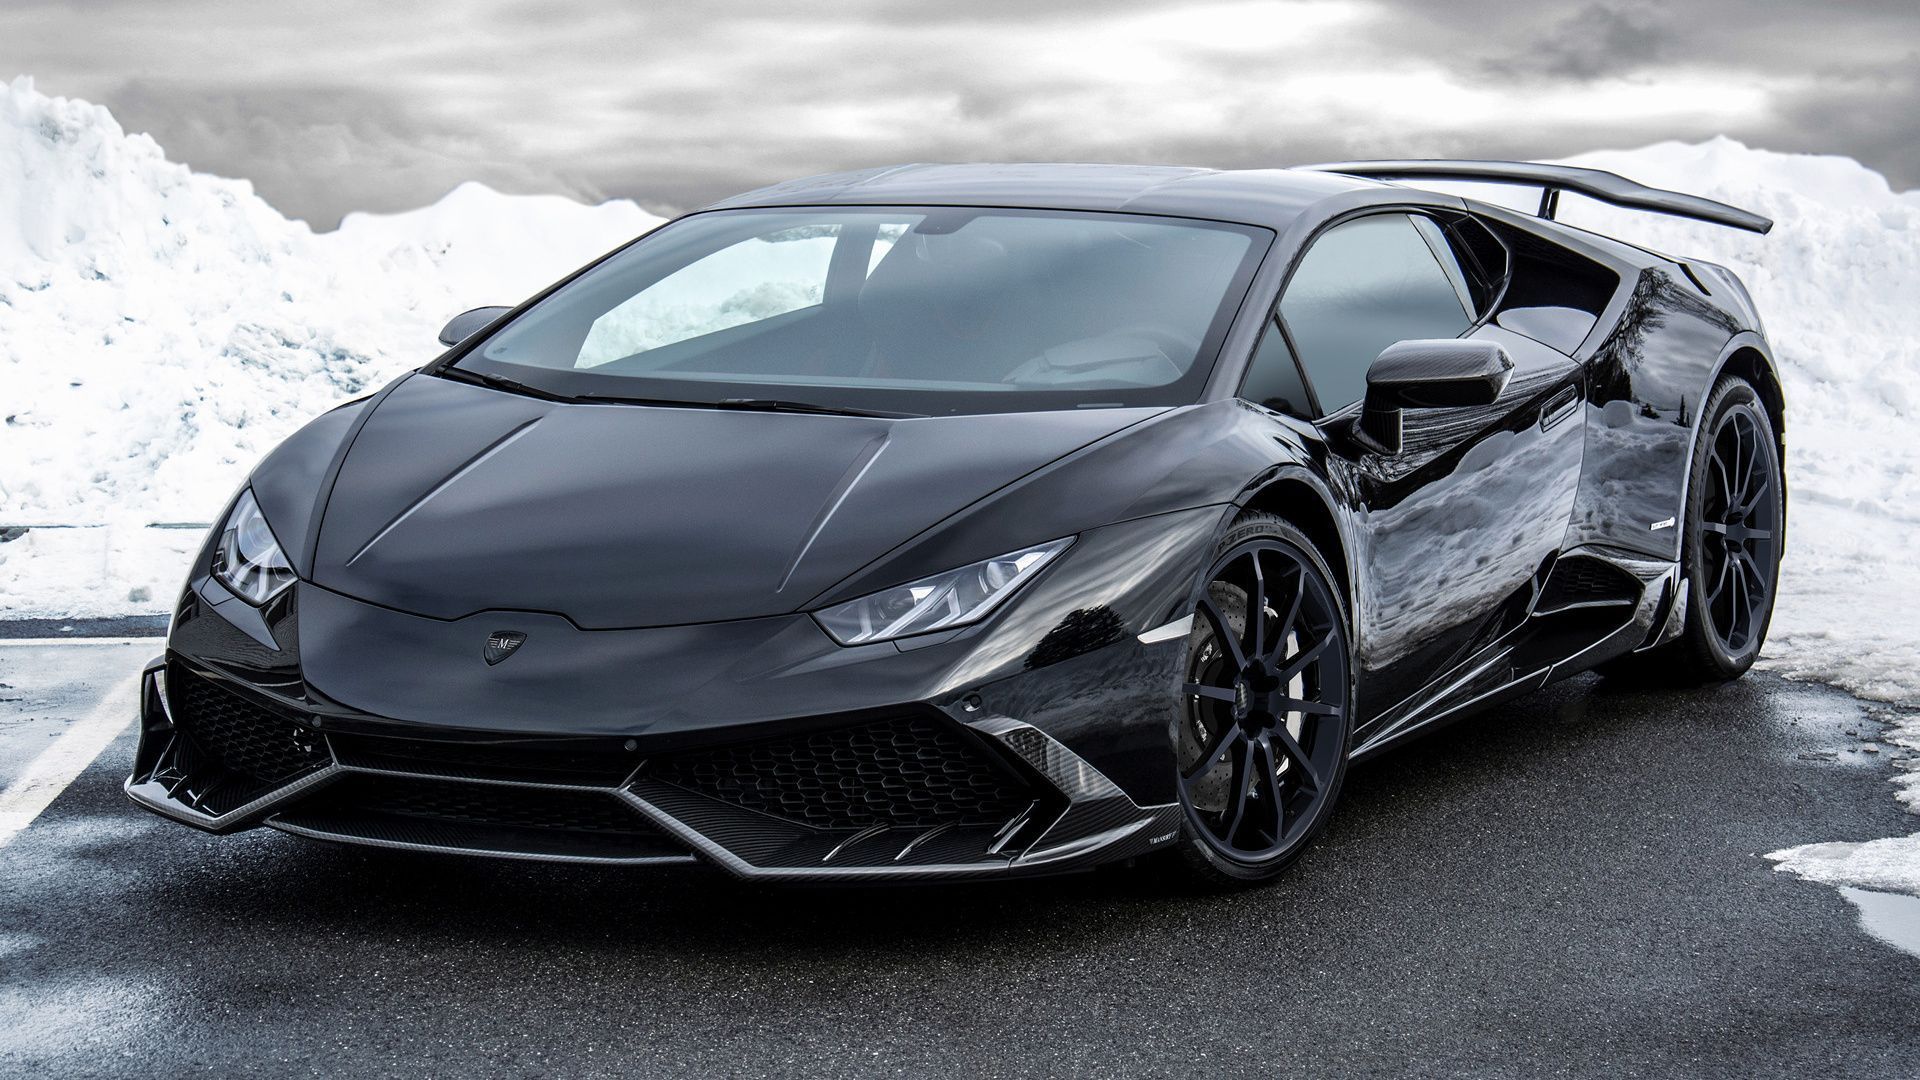 Lamborghini Huracan by Mansory 2015 Wallpapers and HD Images